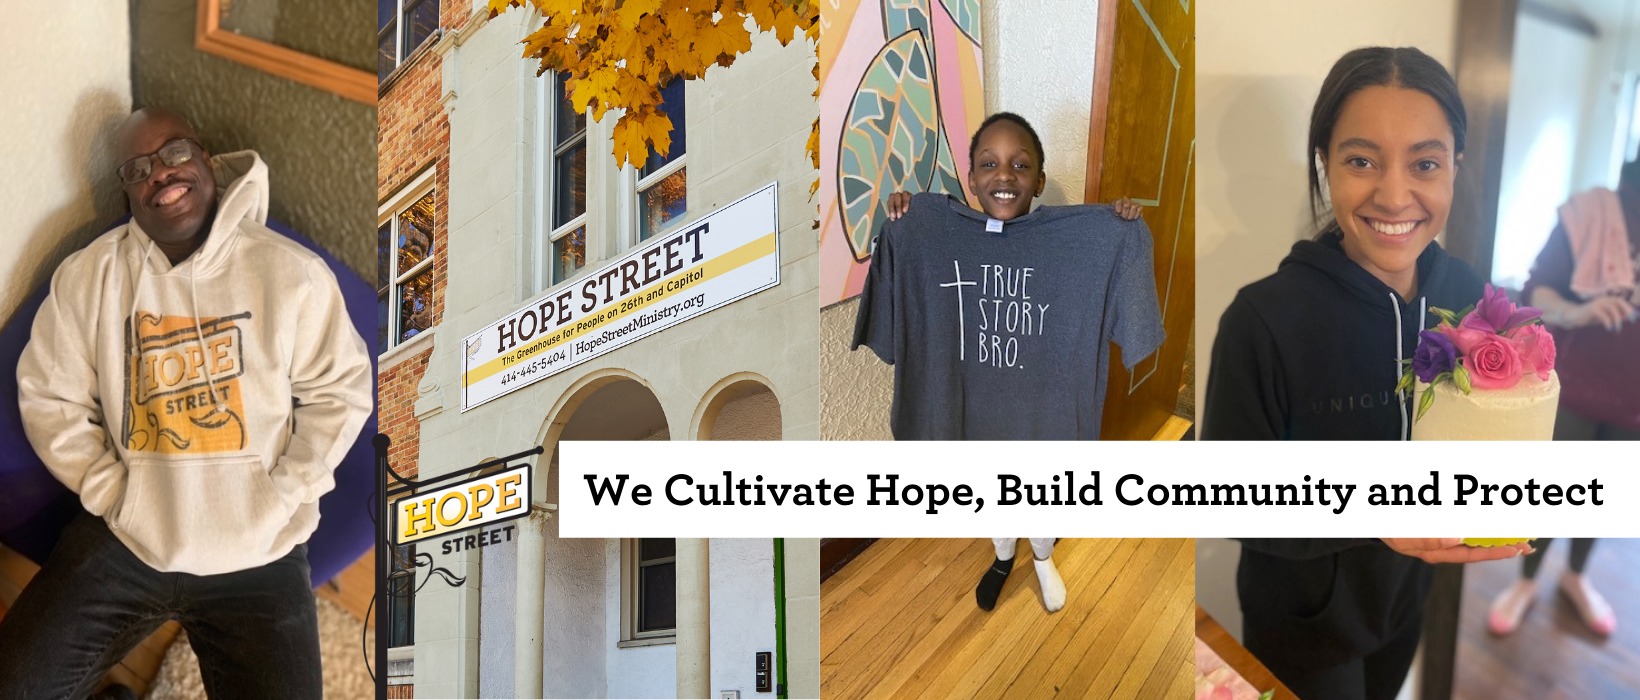 Living life authentically at Hope Street